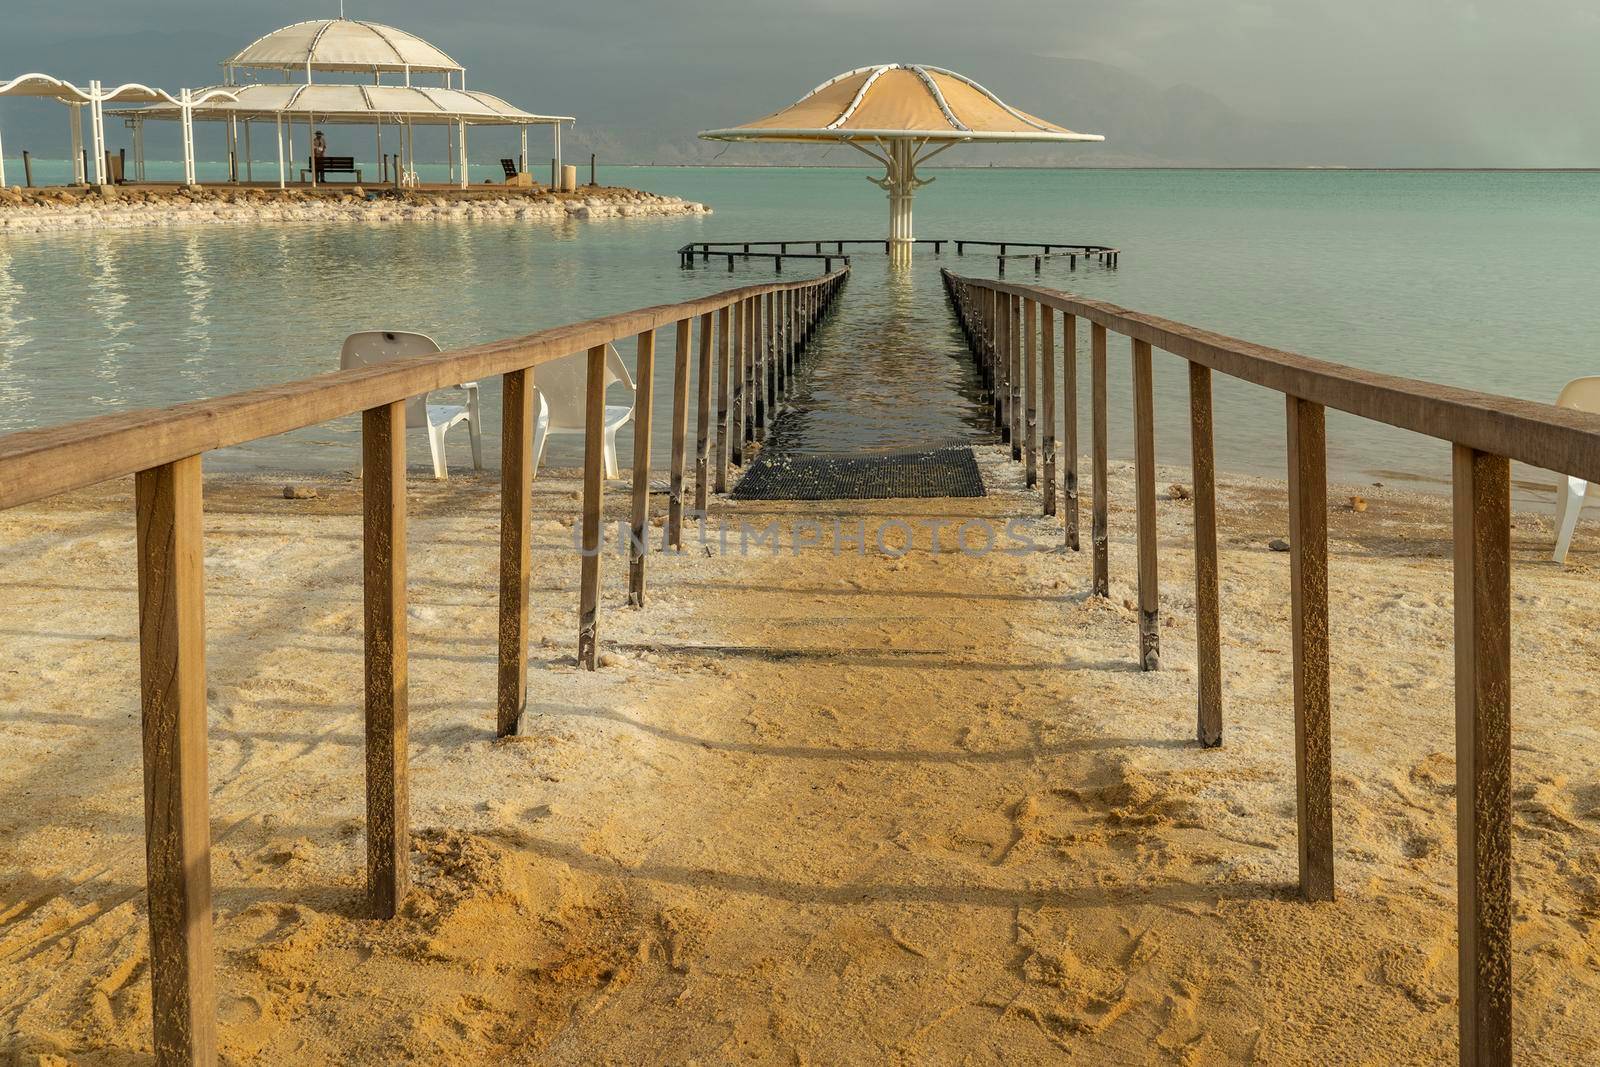 Fenced off with a wooden railing, the entrance leading to the canopy into the water of the Dead Sea